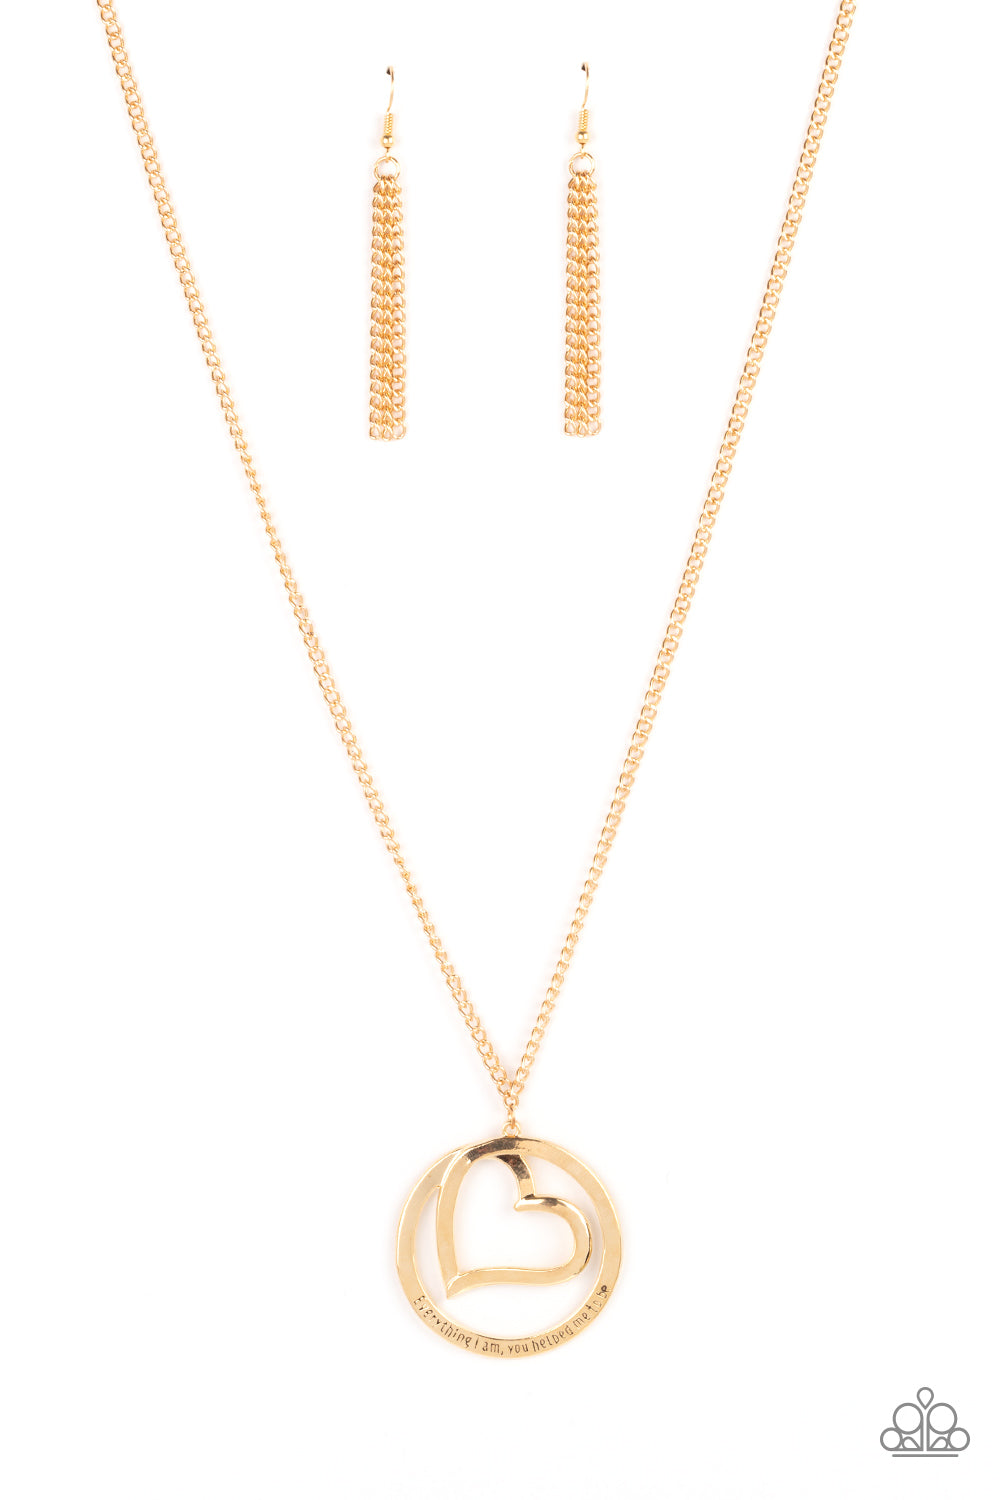 Positively Perfect Paparazzi Accessories Necklace with Earrings - Gold